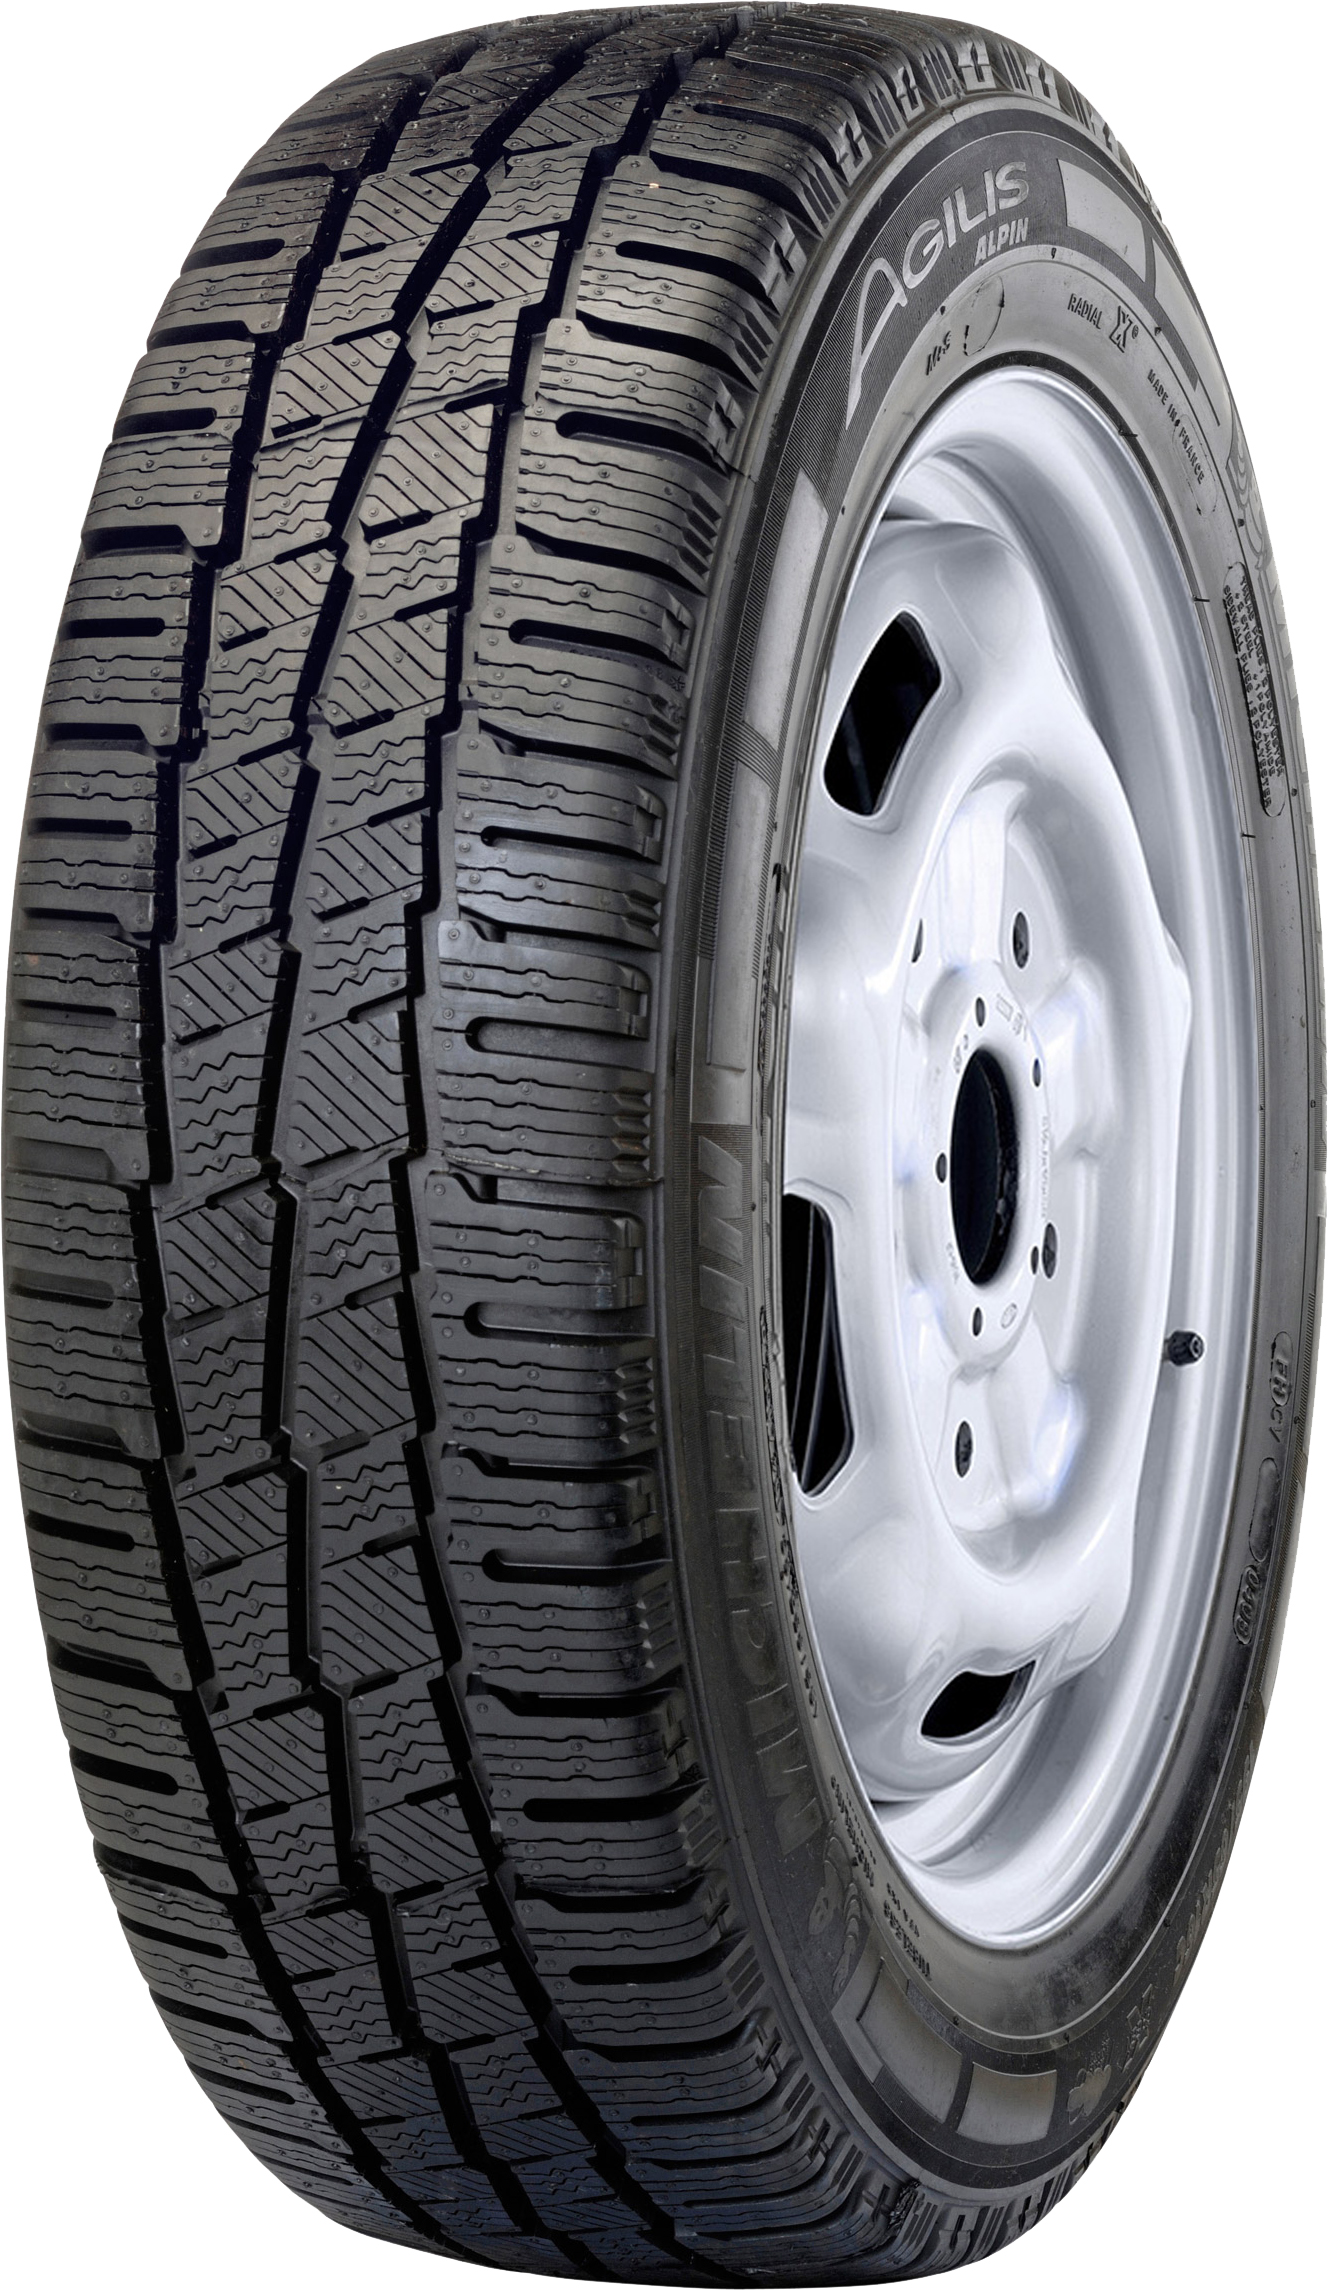 Anvelope microbuz MICHELIN AGILIS ALPIN PS=106T 215/65 R16 109R